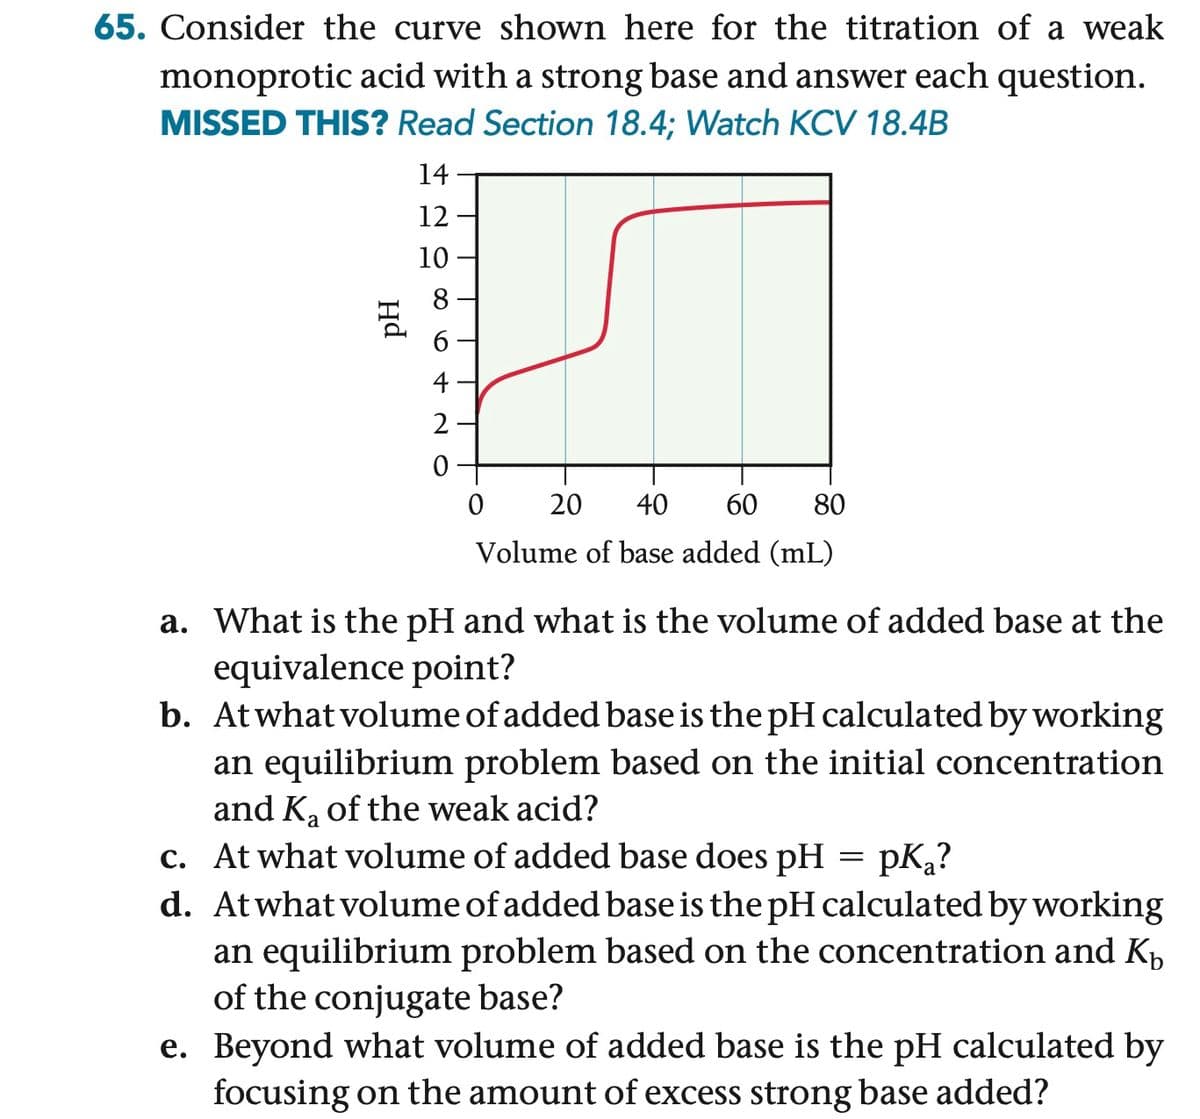 65. Consider the curve shown here for the titration of a weak
monoprotic acid with a strong base and answer each question.
MISSED THIS? Read Section 18.4; Watch KCV 18.4B
14
12
Hd
10
8
6
4
2
0
0
20 40 60 80
Volume of base added (mL)
a. What is the pH and what is the volume of added base at the
equivalence point?
b. At what volume of added base is the pH calculated by working
an equilibrium problem based on the initial concentration
and Ka of the weak acid?
c. At what volume of added base does pH = pKa?
d. At what volume of added base is the pH calculated by working
an equilibrium problem based on the concentration and Kb
of the conjugate base?
e. Beyond what volume of added base is the pH calculated by
focusing on the amount of excess strong base added?